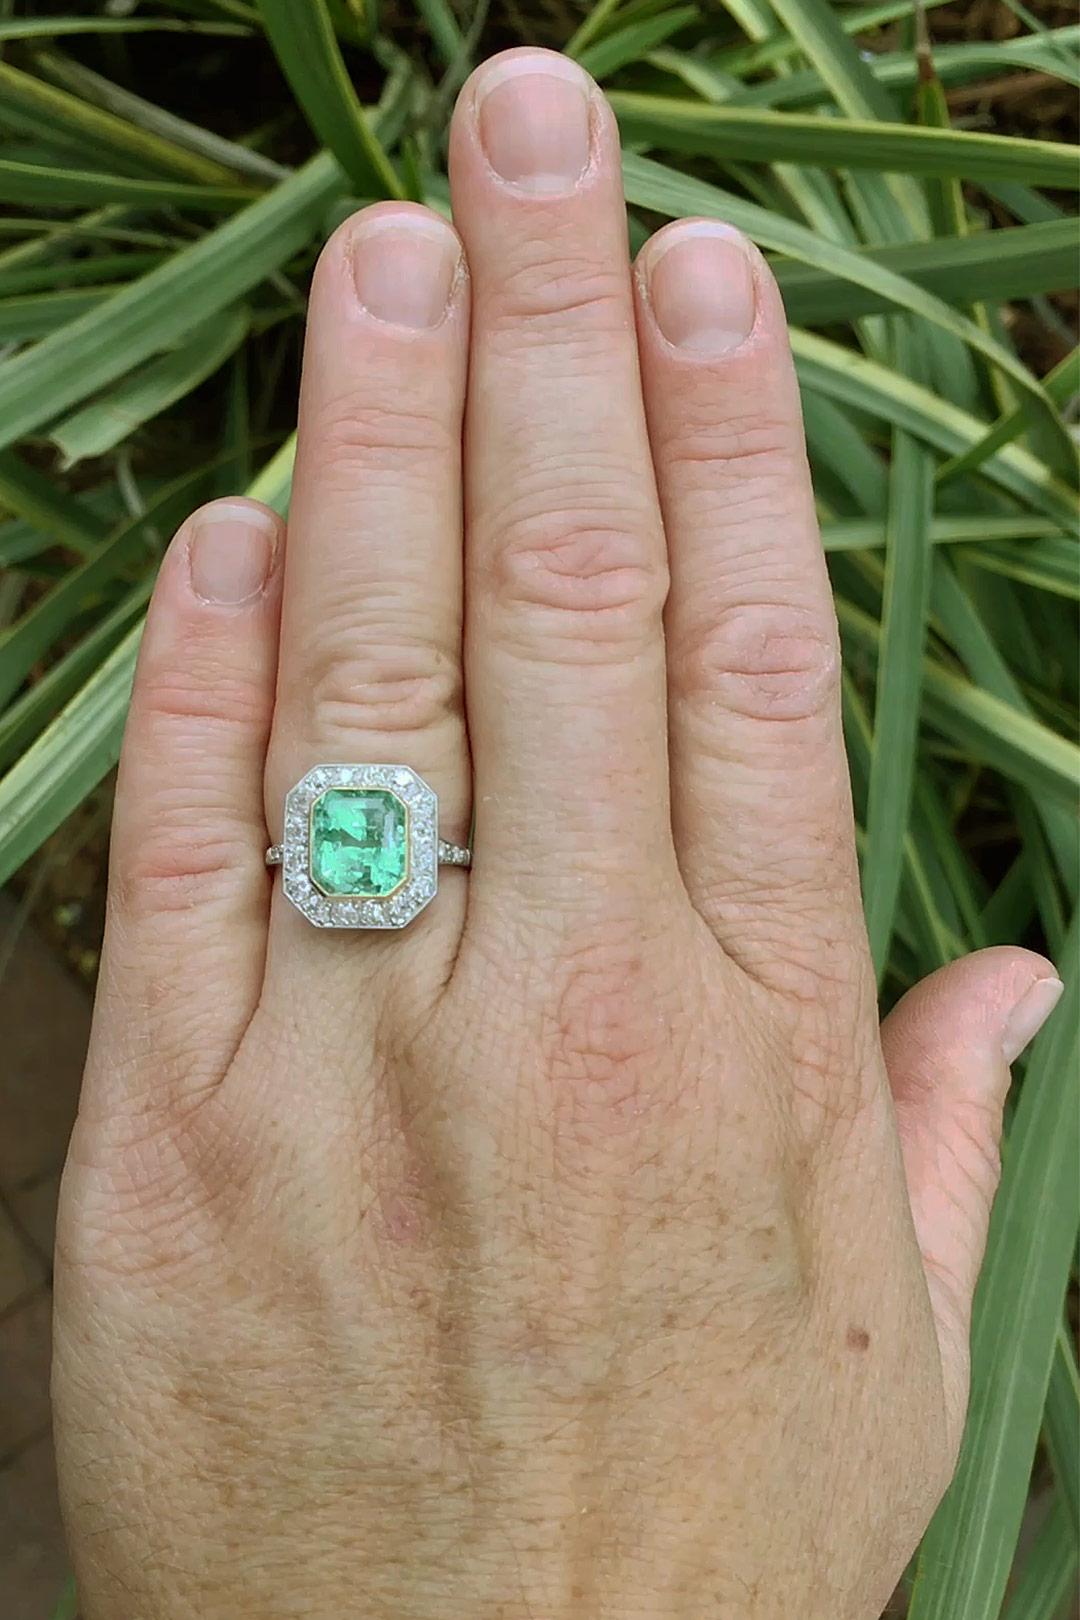 This enticing 3 carat Colombian emerald and diamond engagement ring, skillfully rendered in the Art Deco style features a large and lush gemstone. The octagon halo shimmering with 16 old European diamonds supported by a pierced filigree platinum and